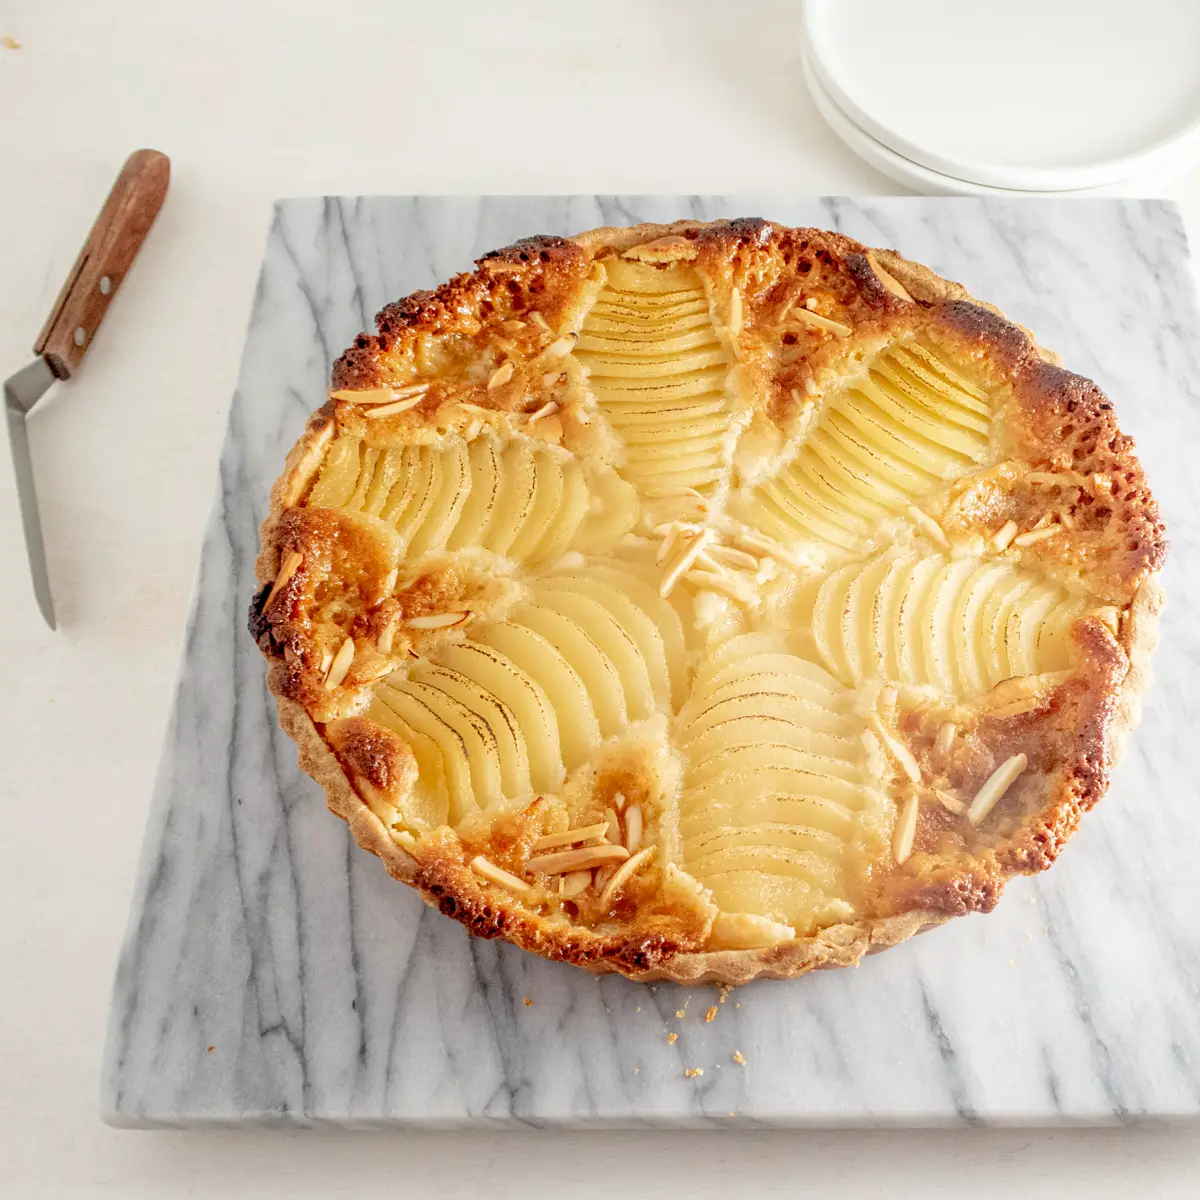 Vegan pear and almond cream tart on a marble slab with plated and a small offset spatula in the background.